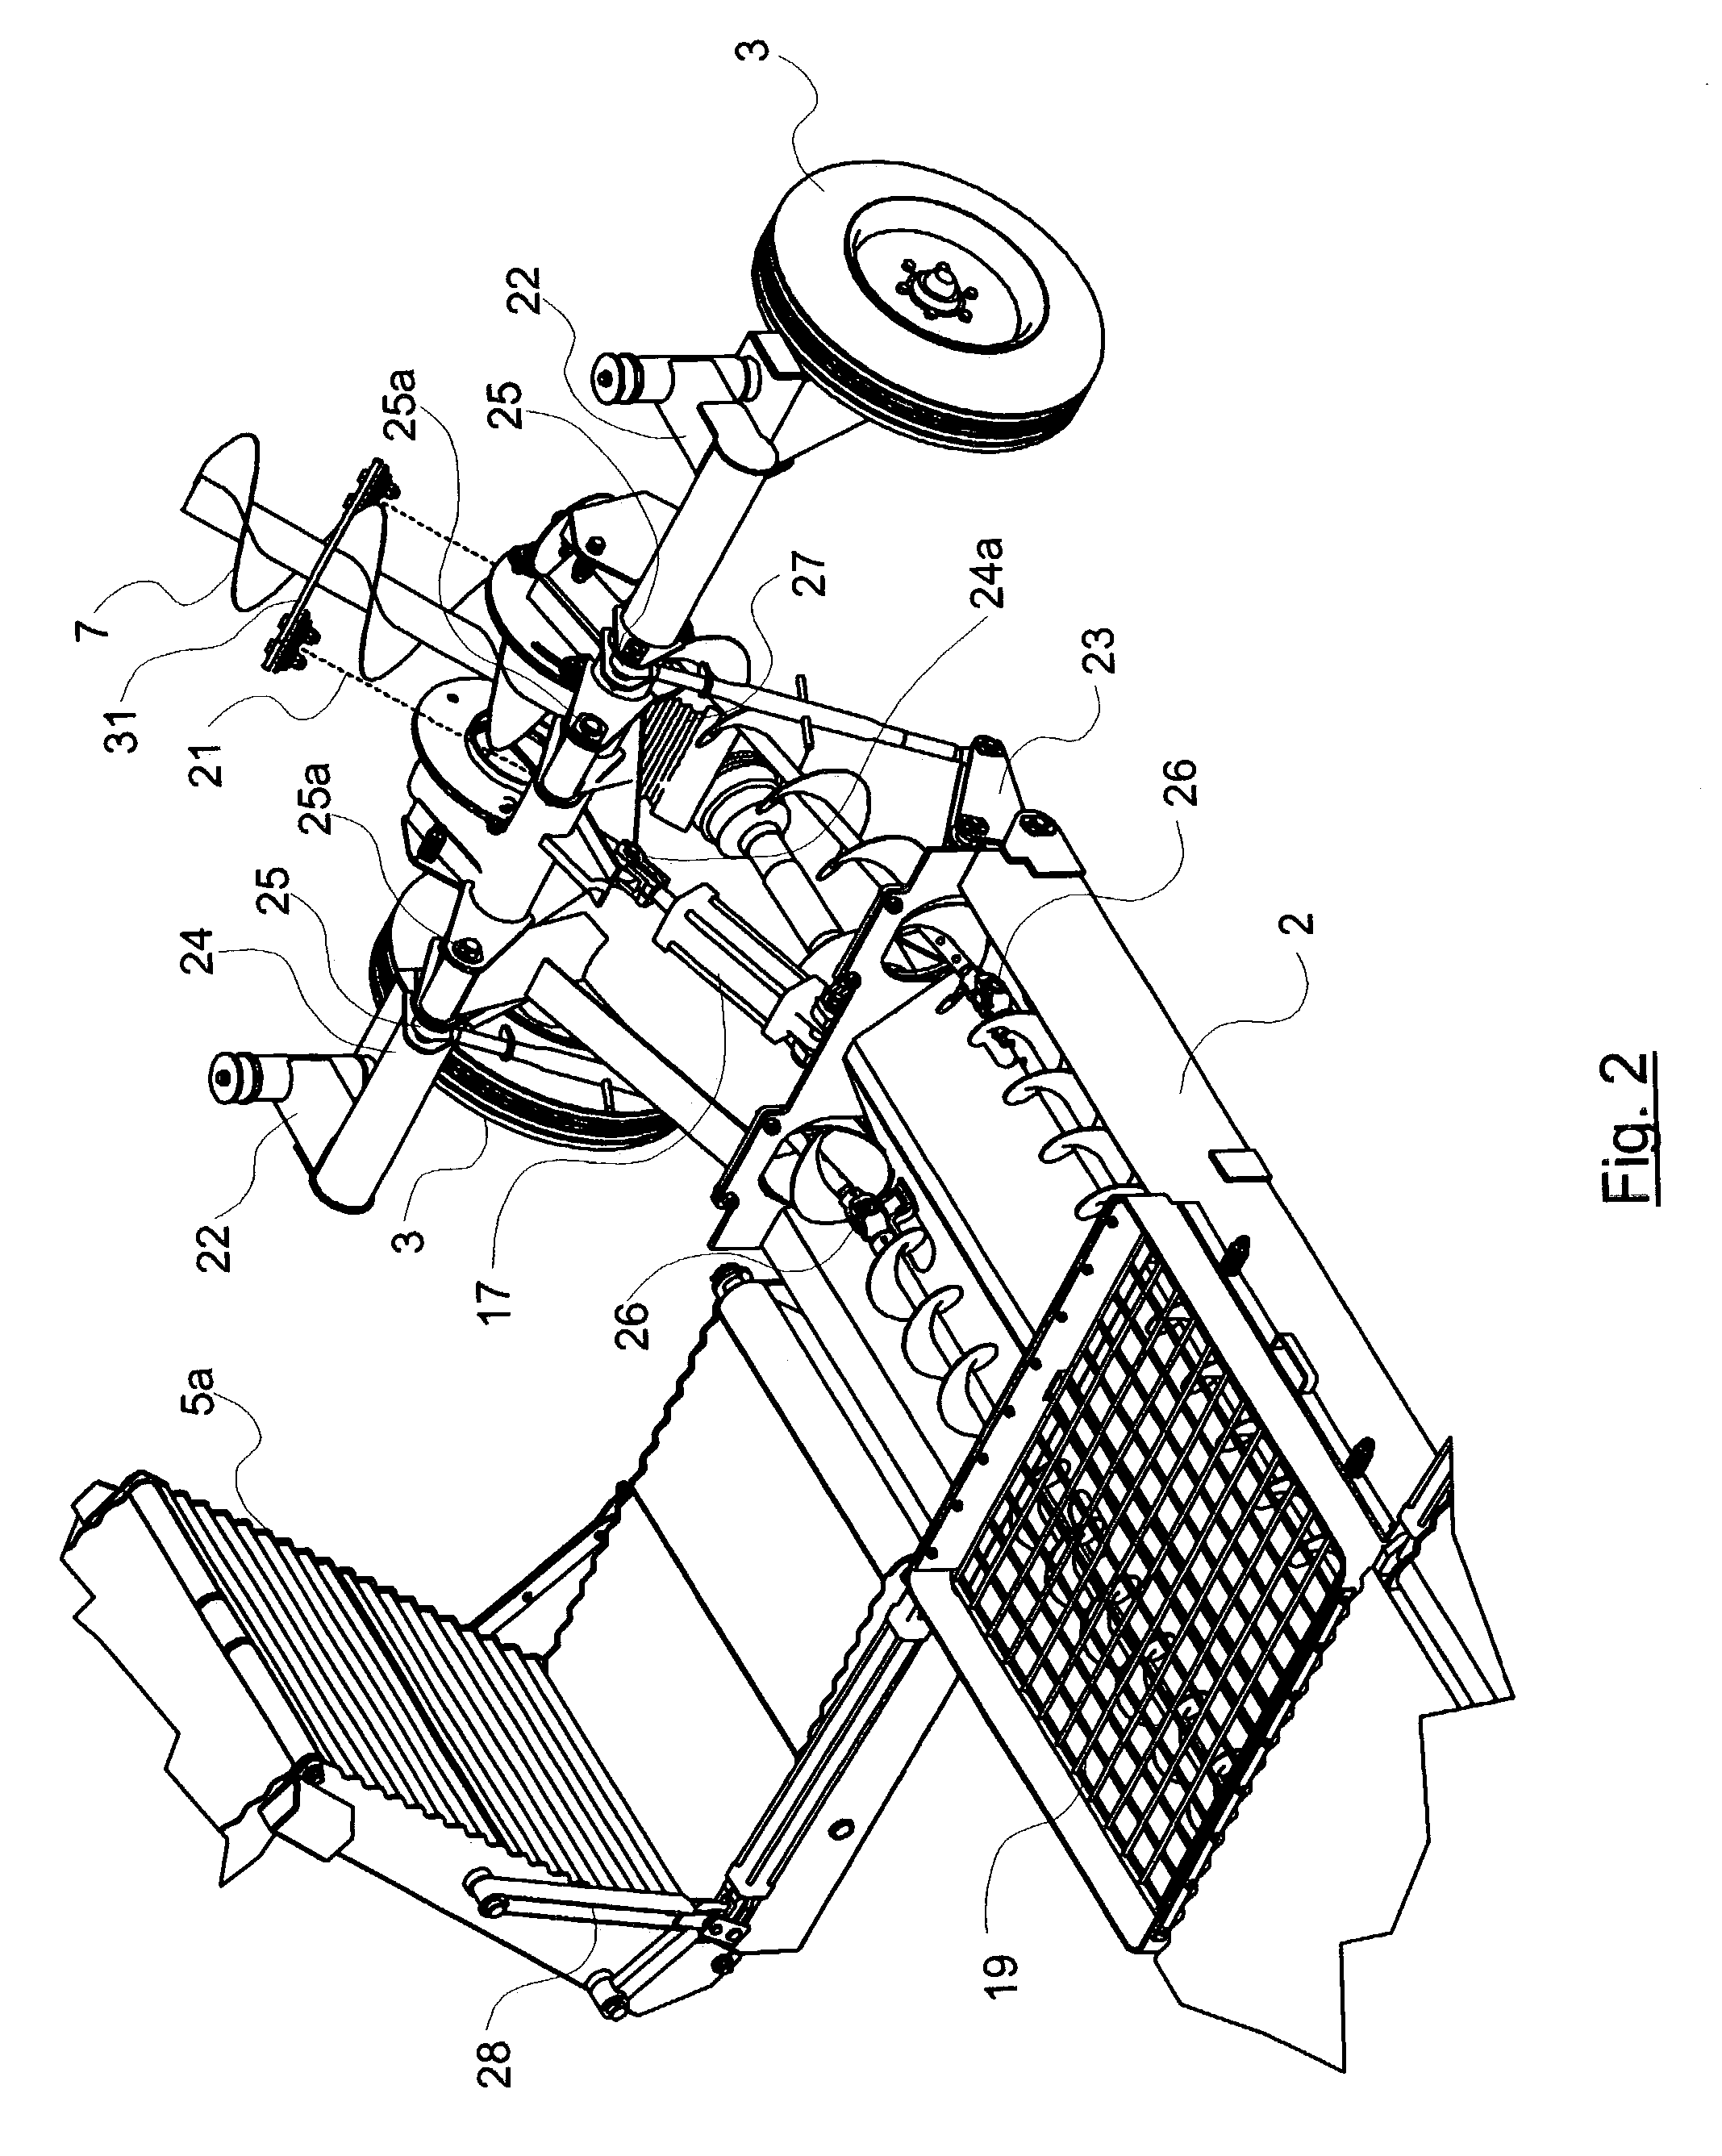 Unloading system for particulate material